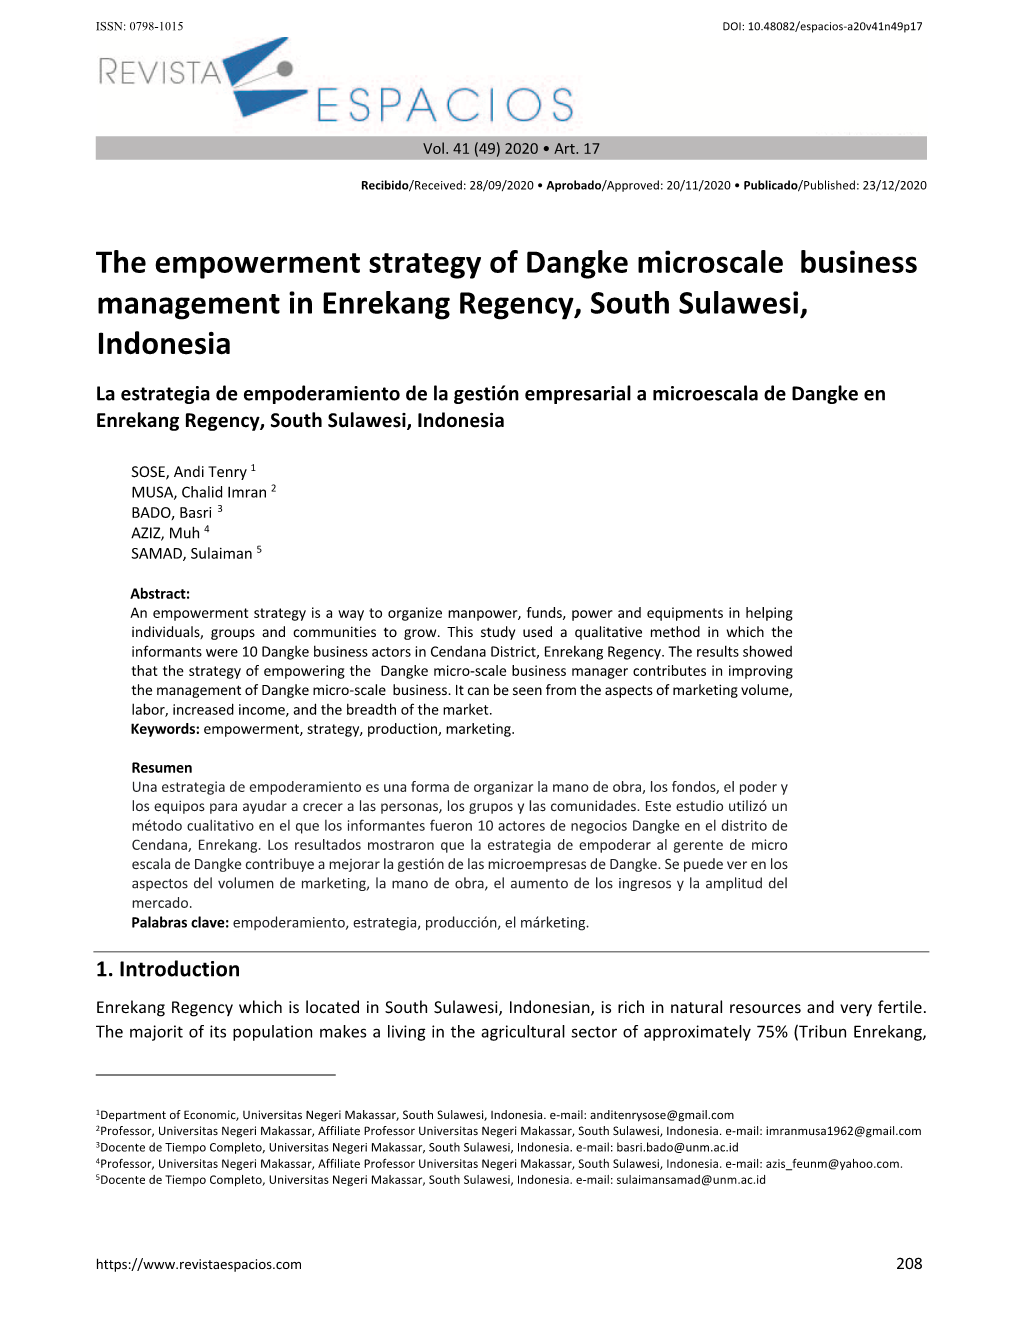 The Empowerment Strategy of Dangke Microscale Business Management in Enrekang Regency, South Sulawesi, Indonesia